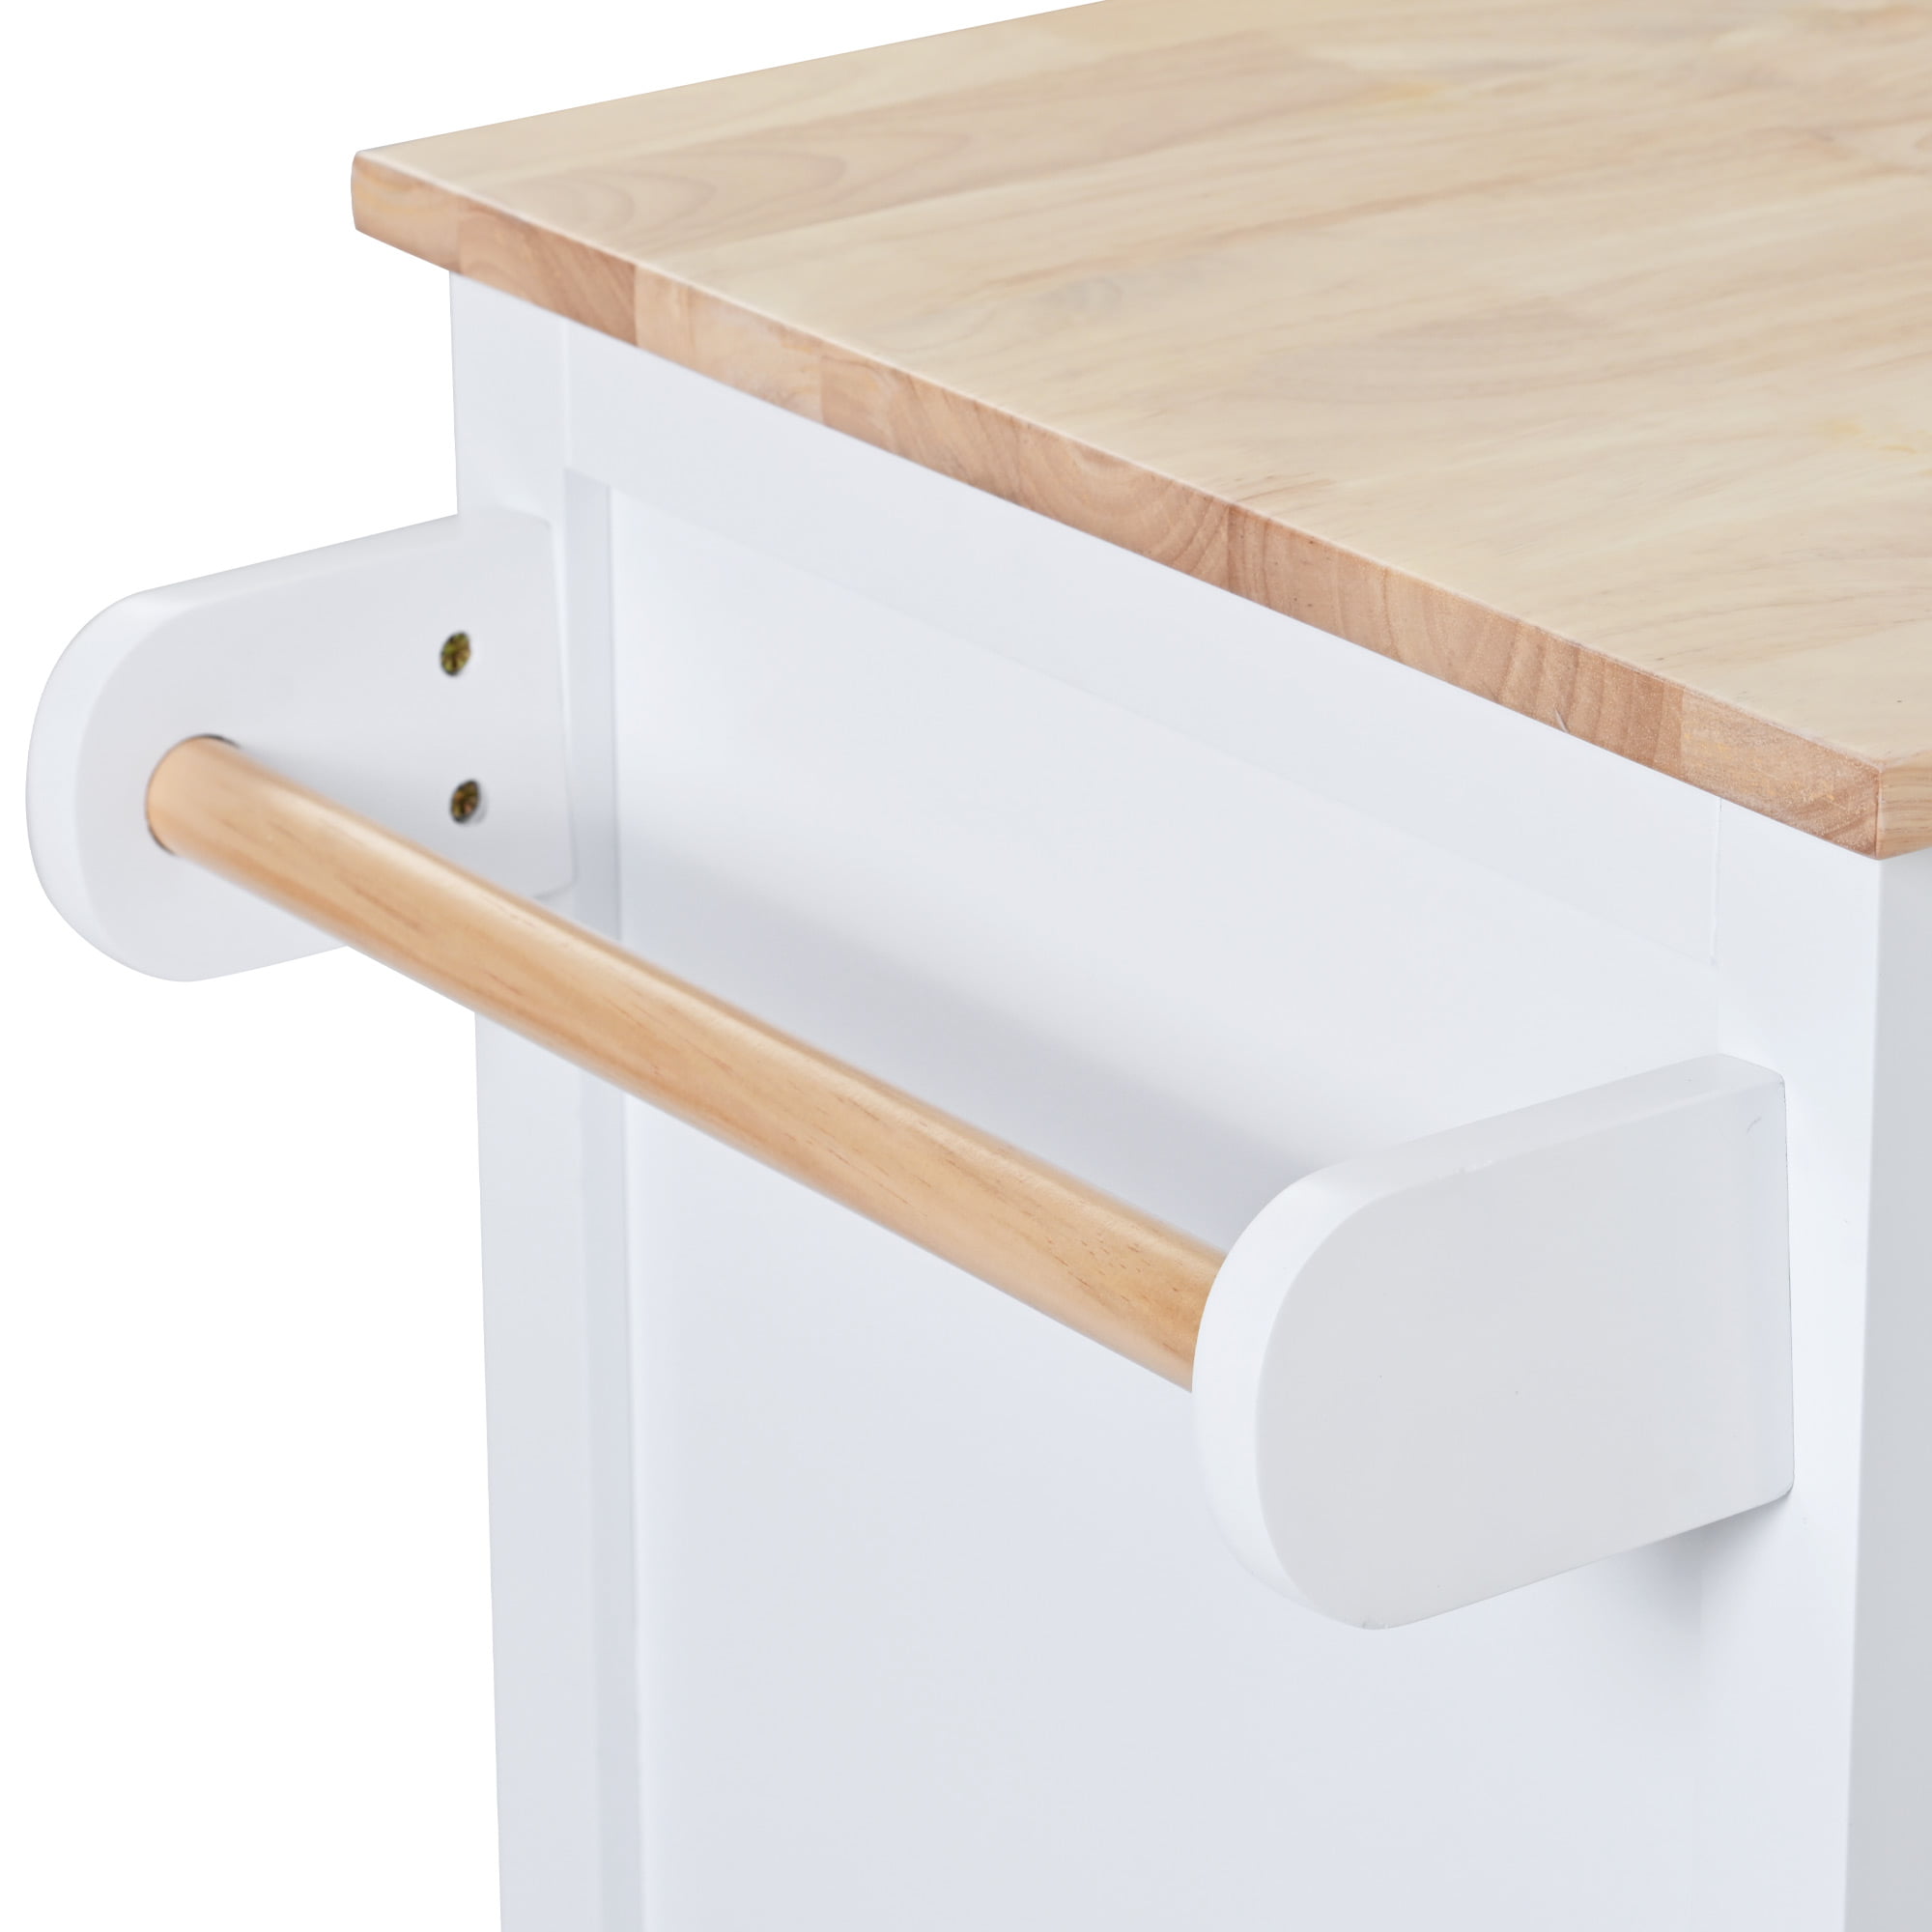 Kitchen Island With 8 Handle-free Drawers And 5 Wheels - SK000002AAW